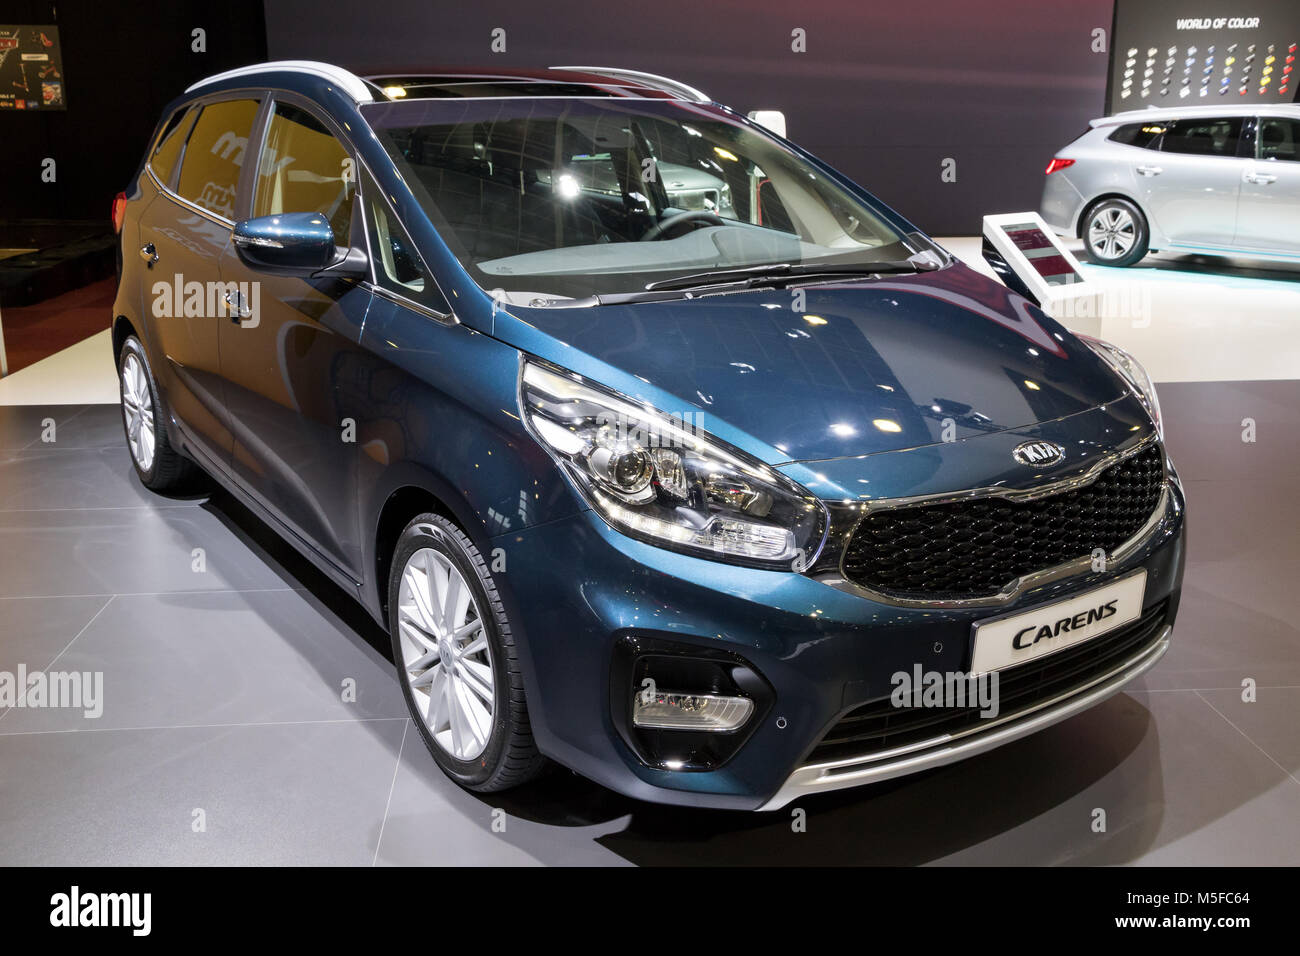 BRUSSELS - JAN 10, 2018: Kia Carens car shown at the Brussels Motor Show. Stock Photo